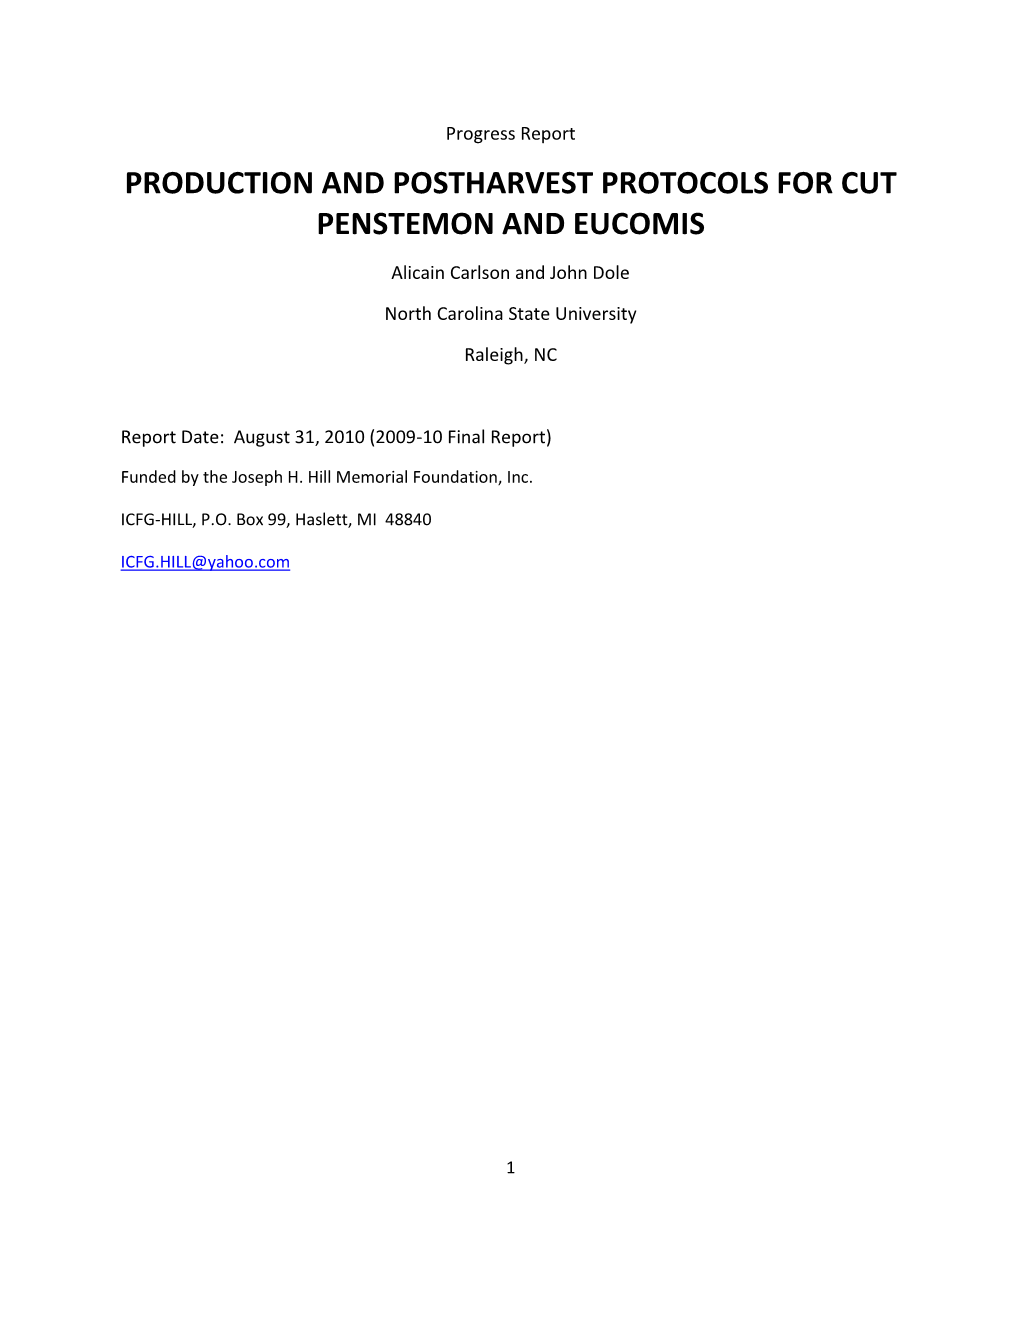 Production and Postharvest Protocols for Cut Penstemon and Eucomis